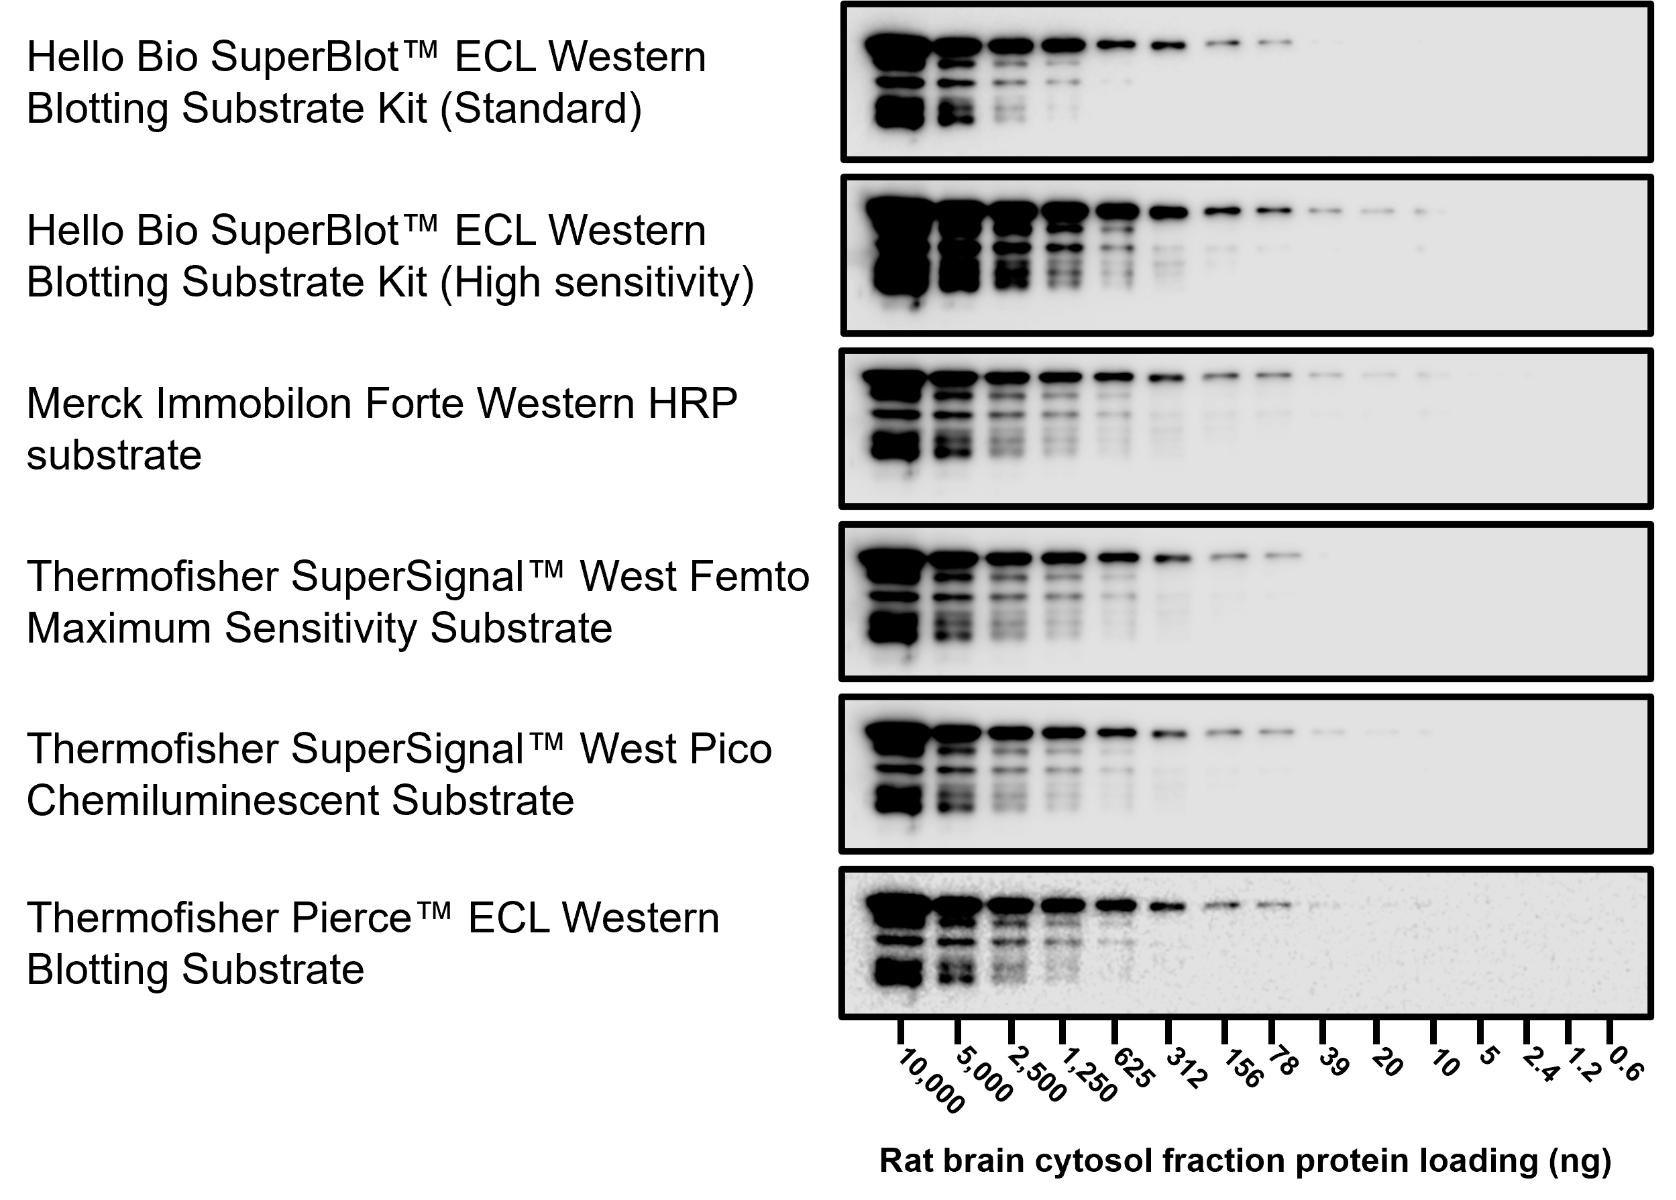 Figure 1. Representative blots for Neurofilament L of SuperBlot<sup>TM</sup> ECL Western Blotting Substrate Kit (High sensitivity) and competitor solutions